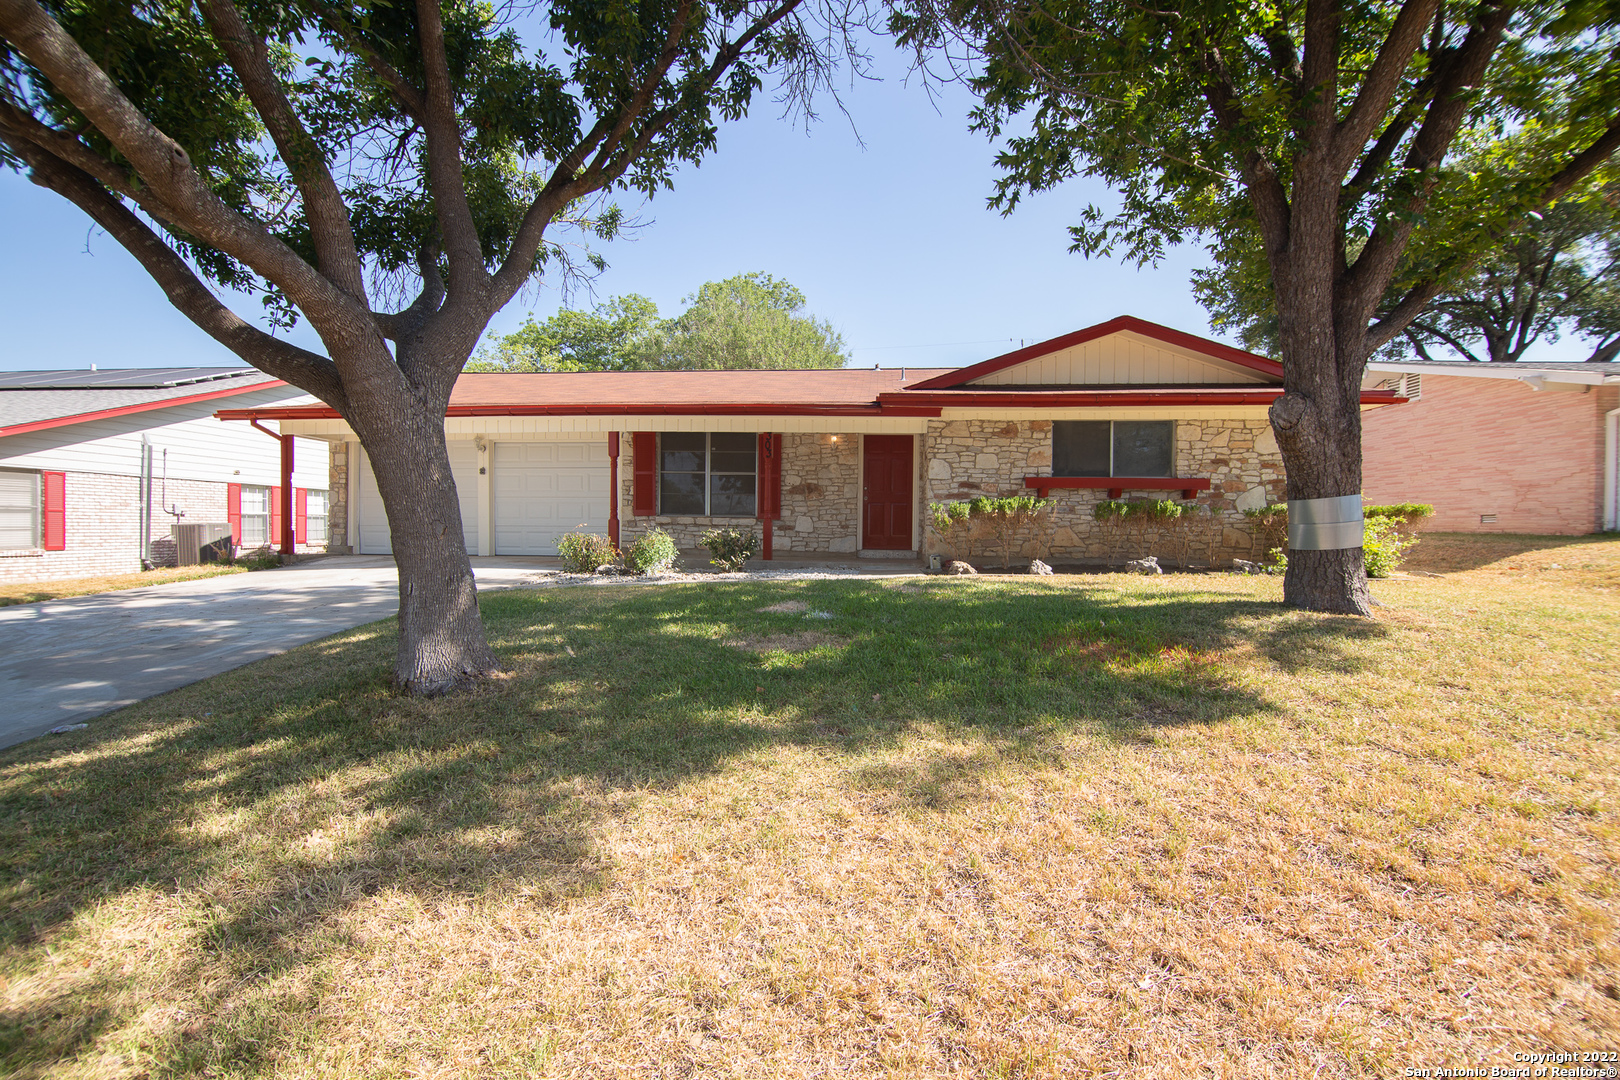 Ranch style home conveniently located off of IH 410 north.  Be in the middle of all the convenience city living has to offer. Shopping, entertainment, eating, and easy access to the airport are at your doorstep.  This home is located in the Alamo Heights School District. Enjoy the large backyard and open space it provides.